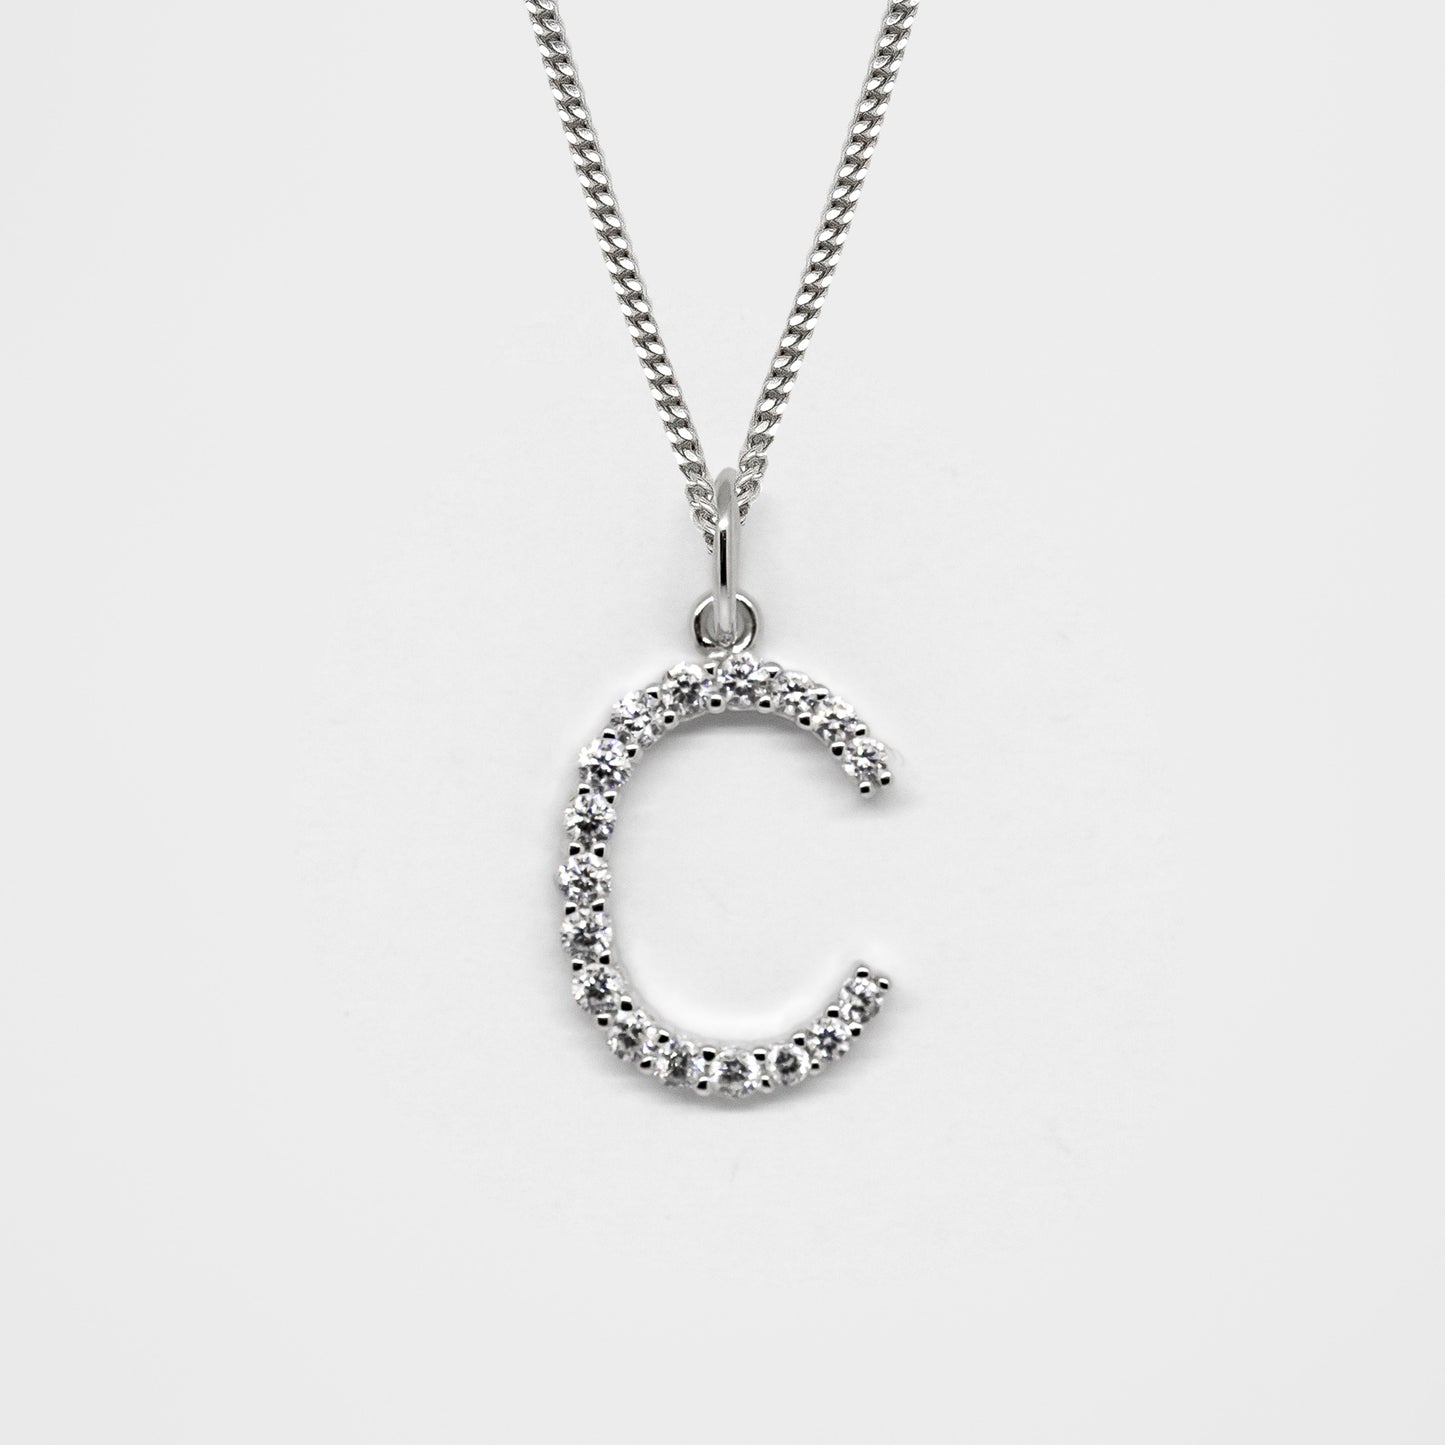 Silver 925 Initial Necklace - C